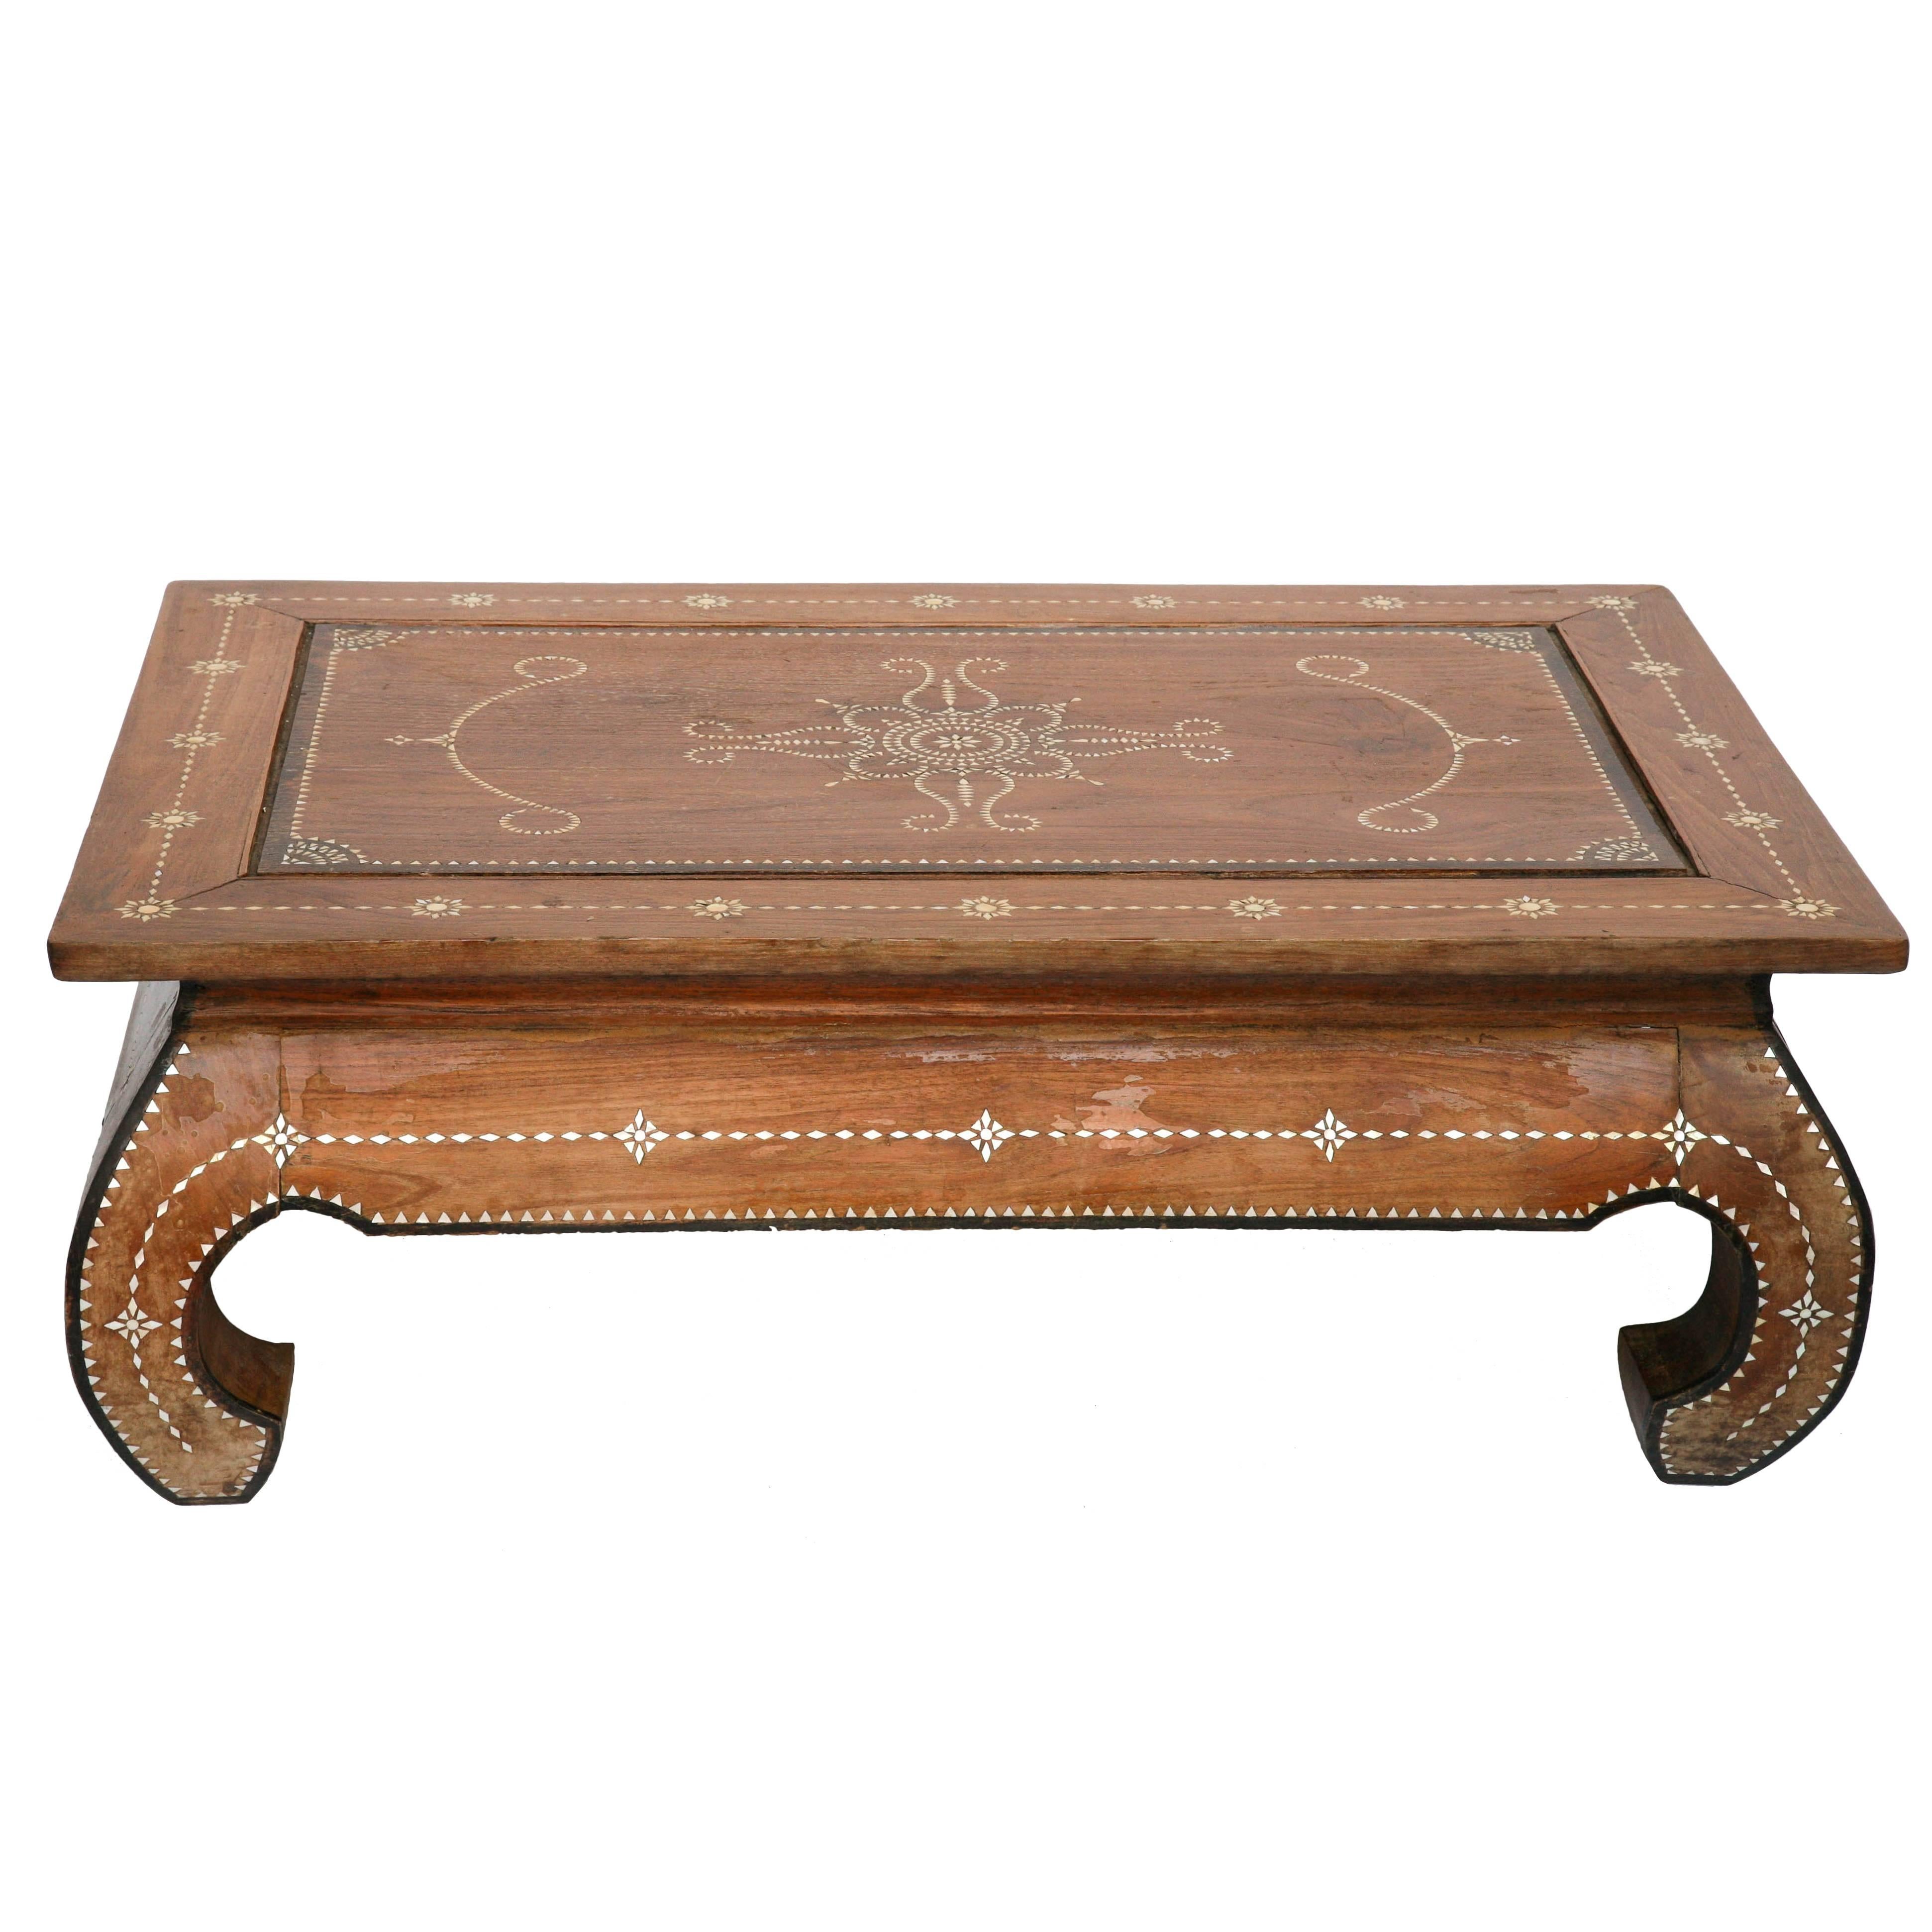 Superbly Inlaid Moroccan Coffee Table